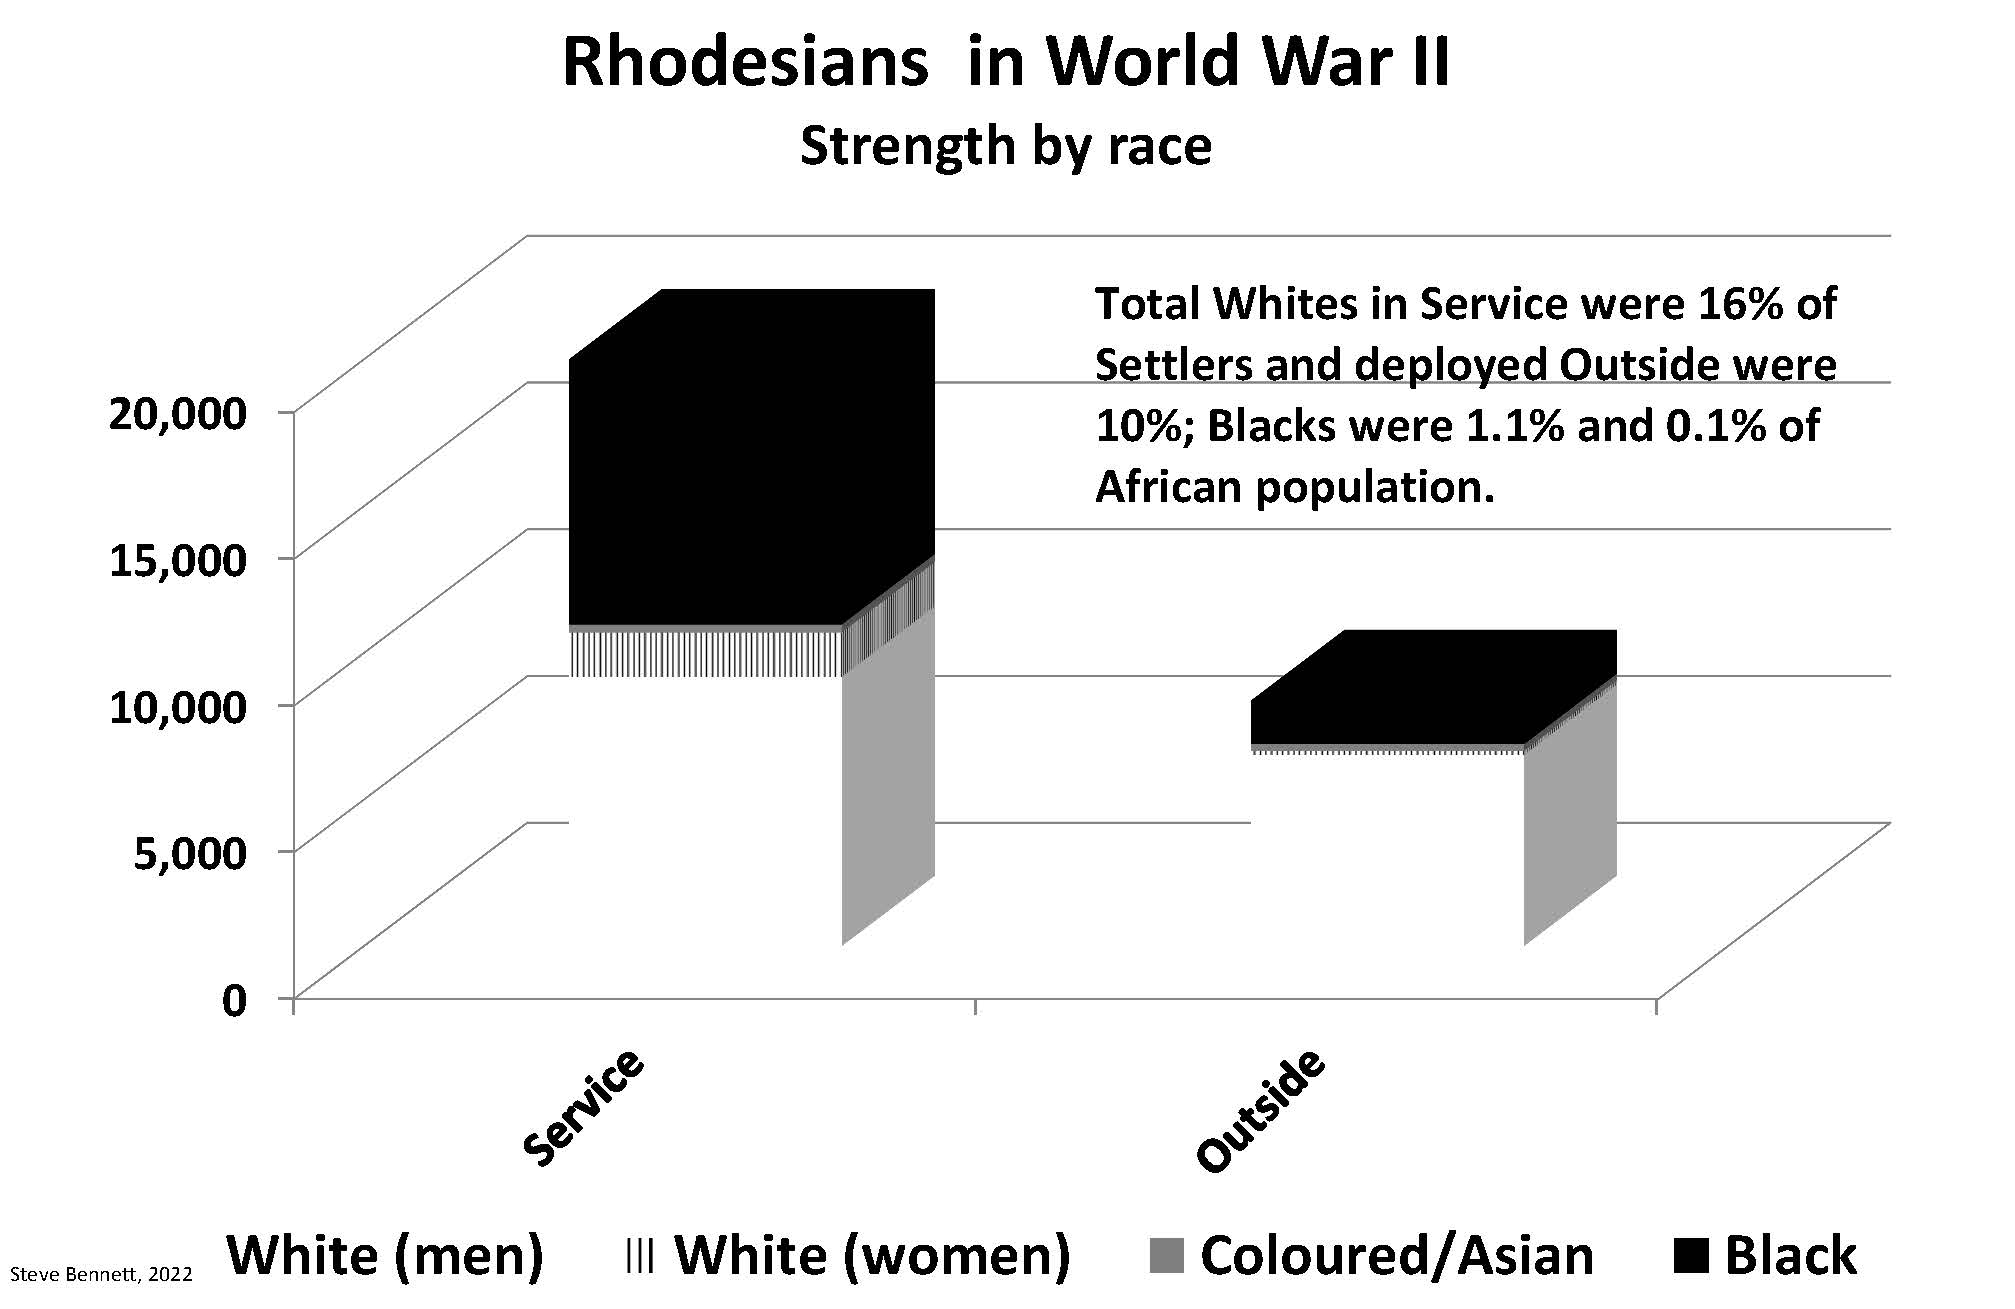 Chart showing strength of Rhodesian forces in World War II by race